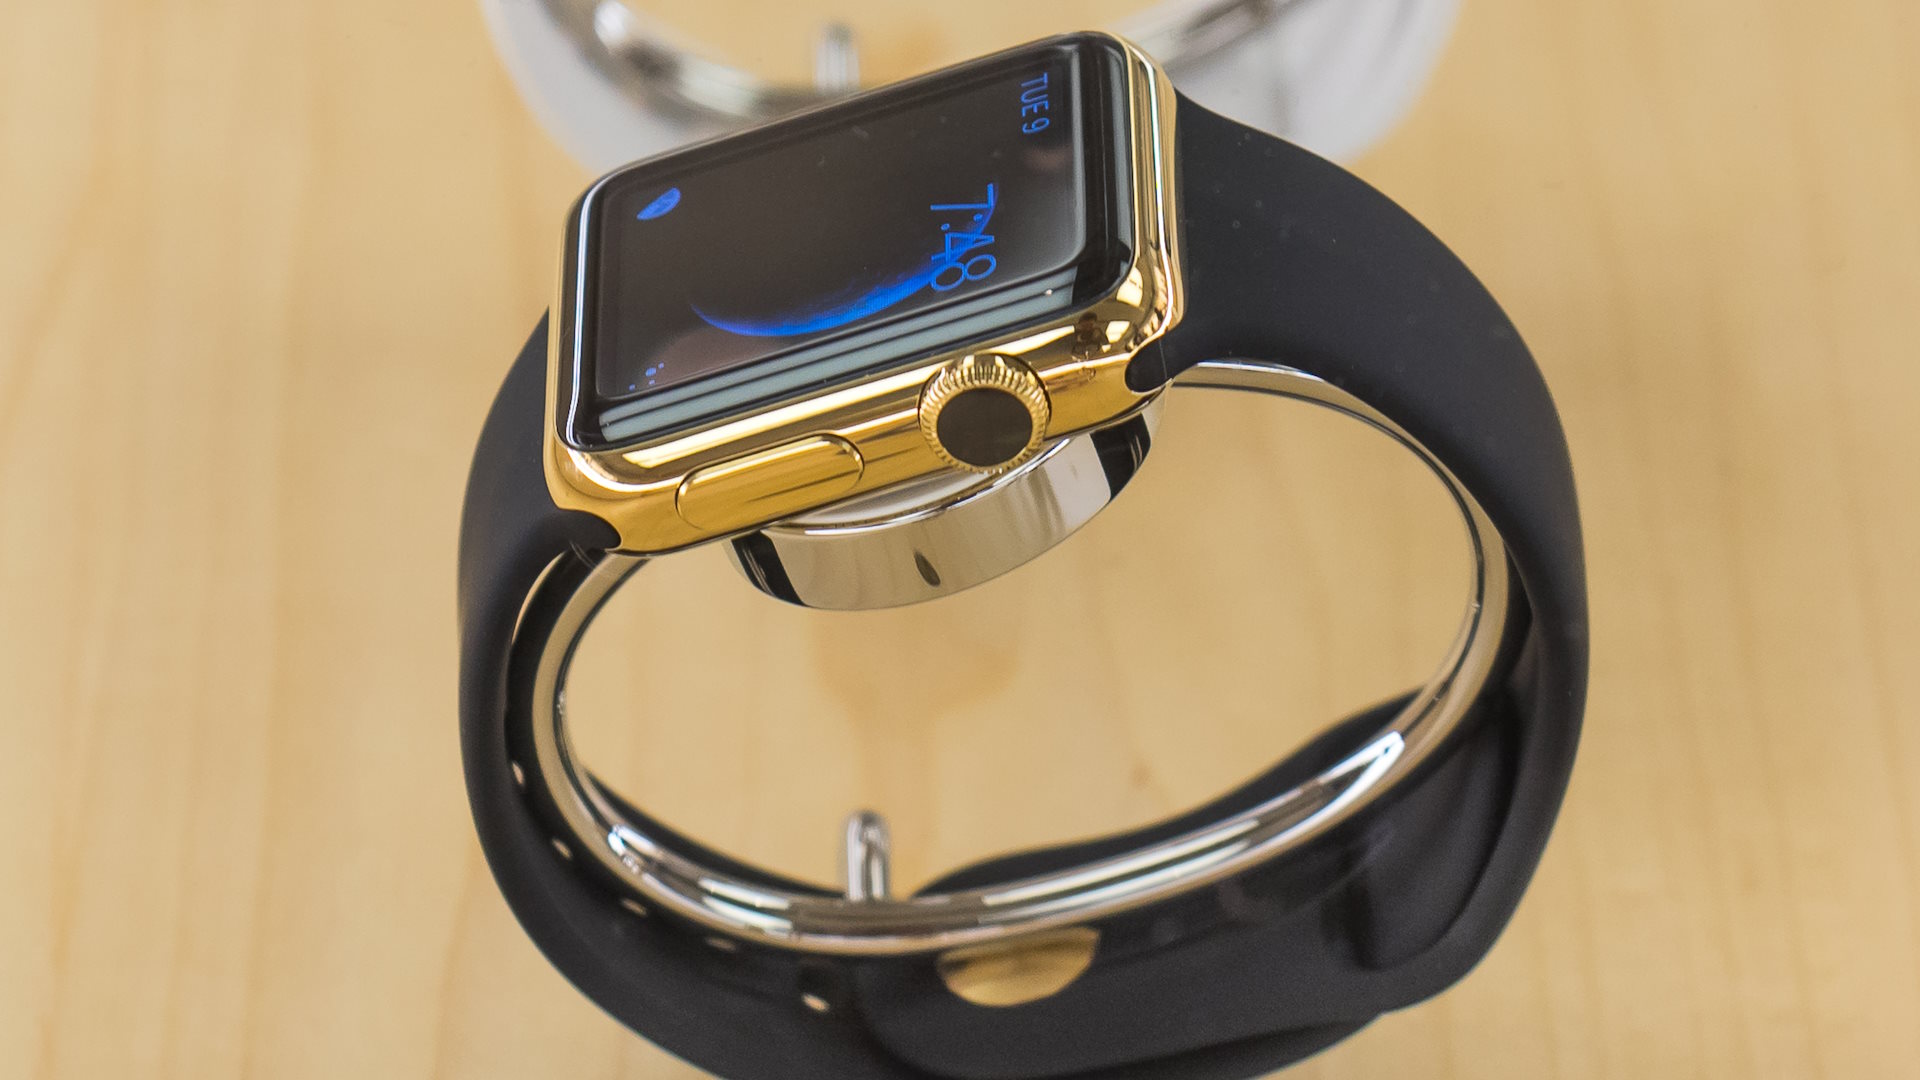 The first generation of Apple watches is now obsolete, including the $17,000 gold model